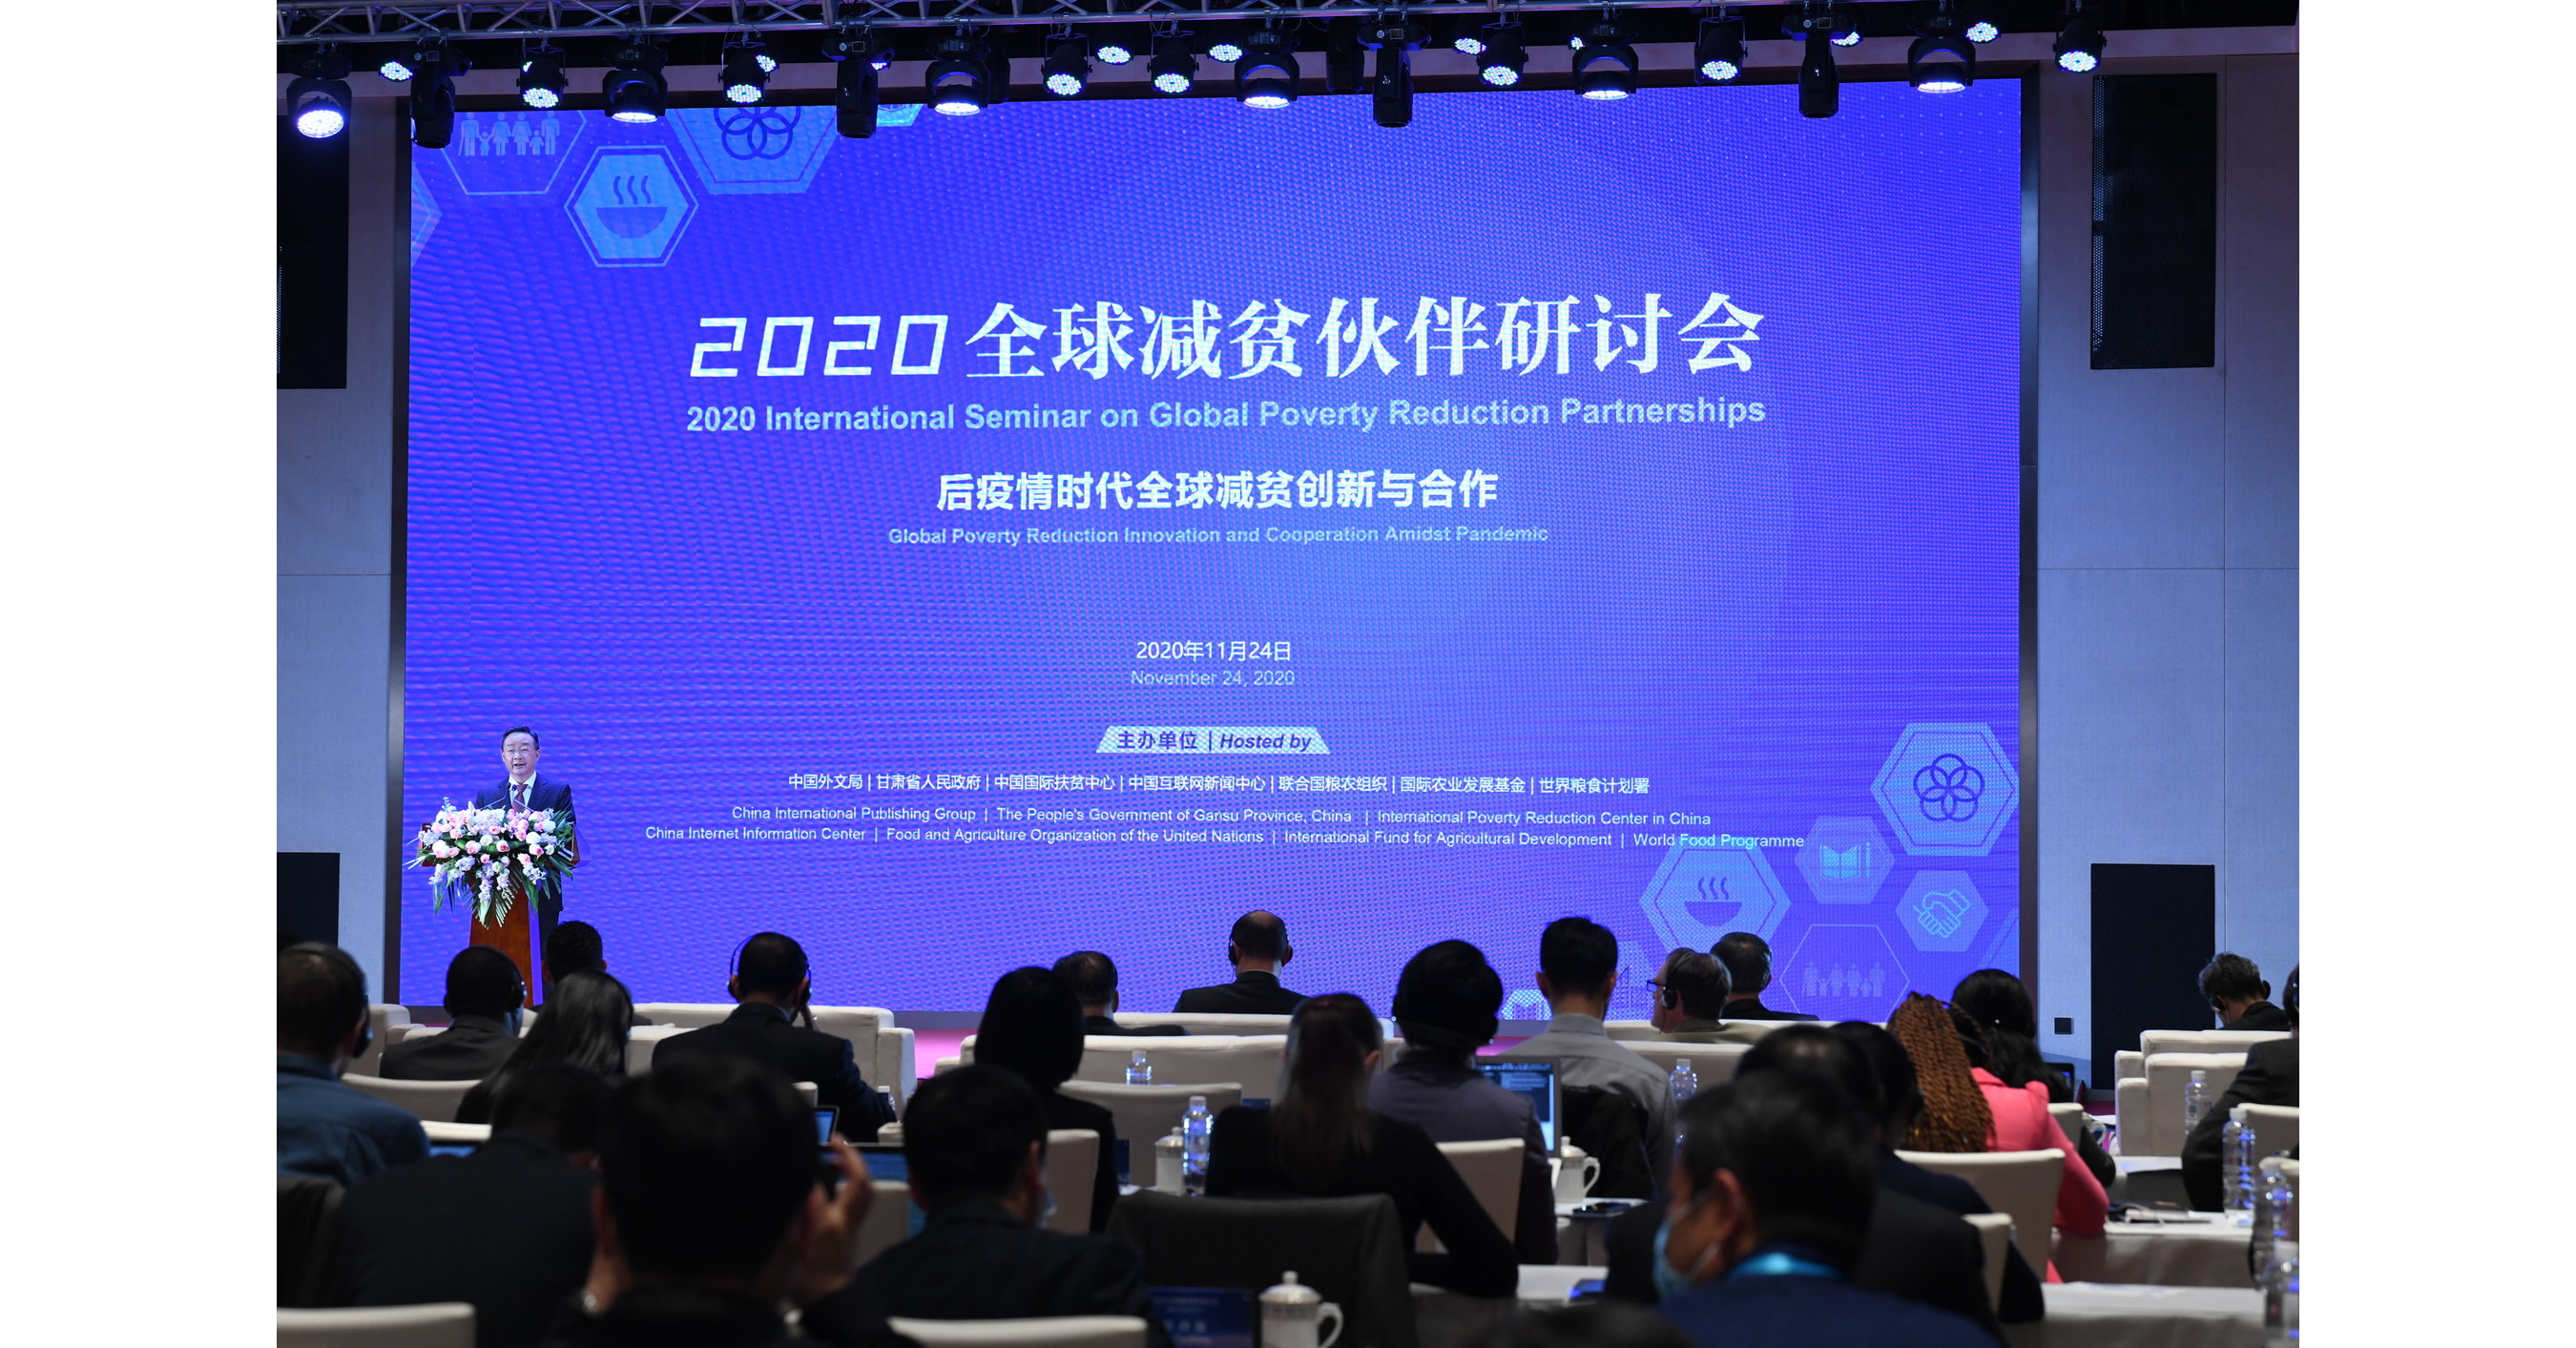 china.org.cn: seminar calls for global poverty reduction innovation, cooperation amidst pandemic